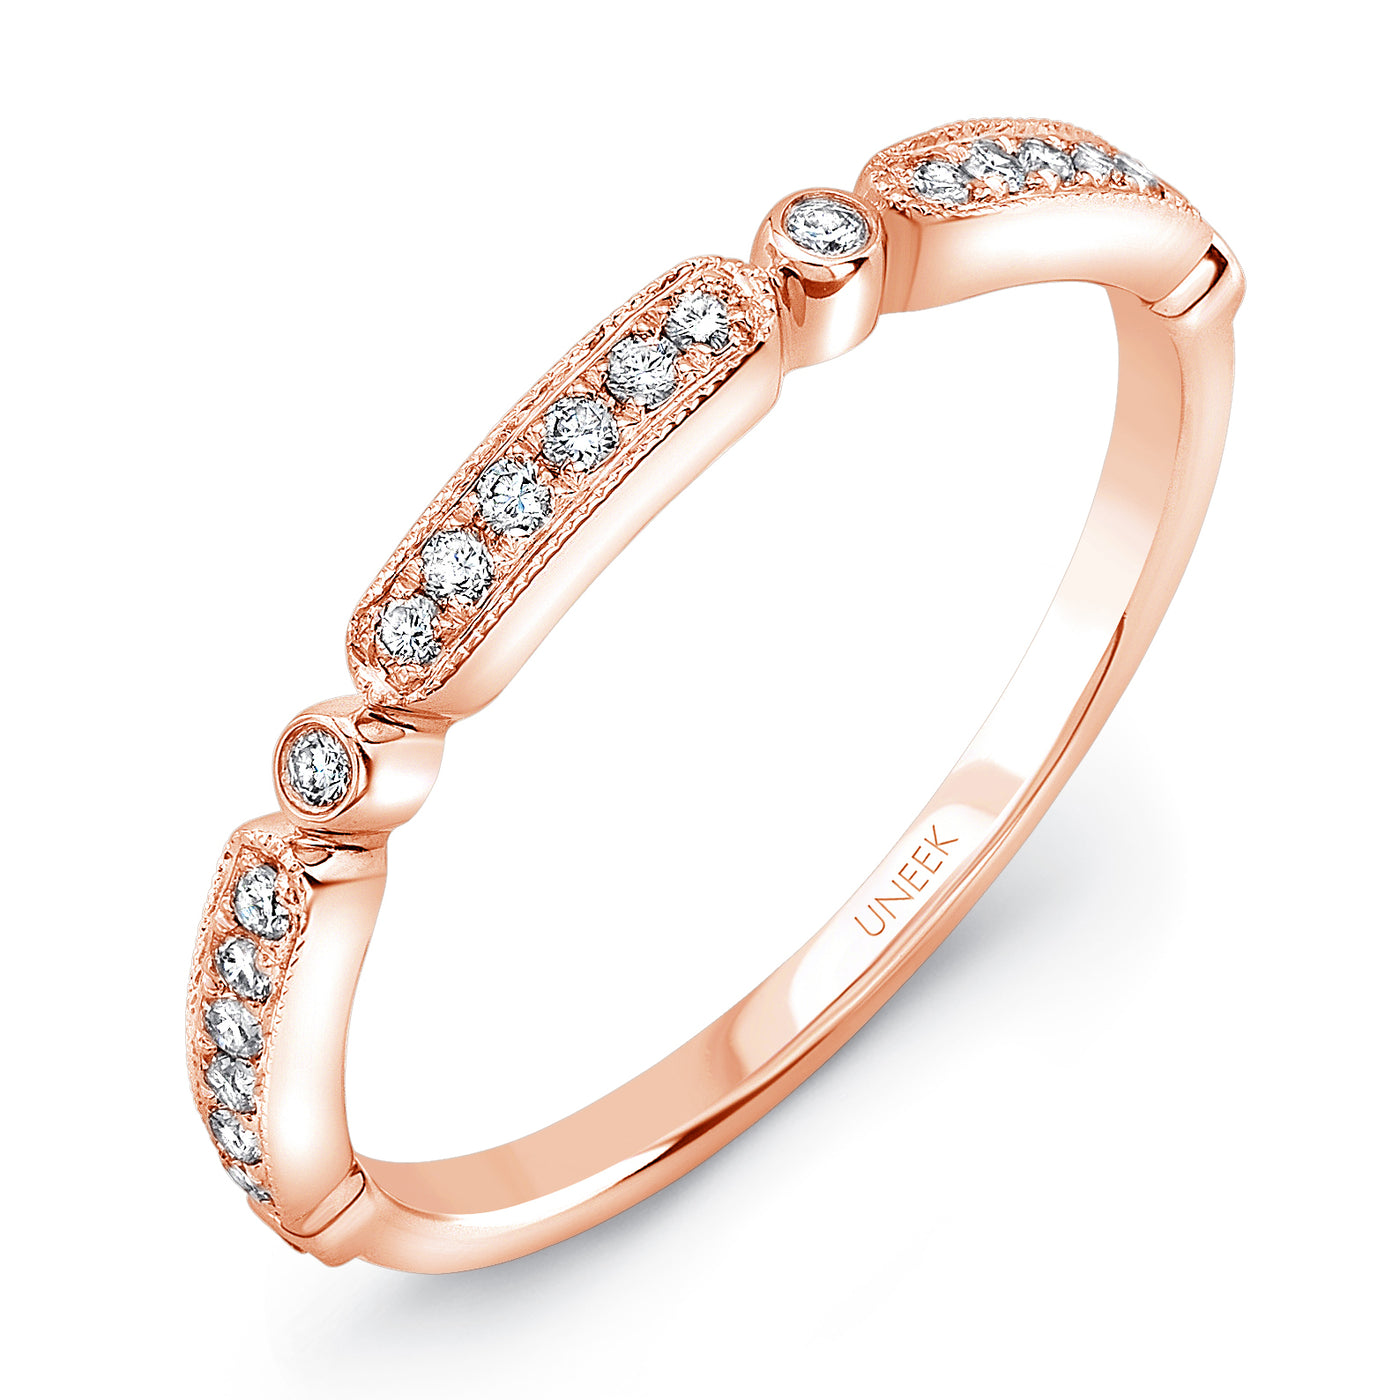 Uneek "Melrose" Stackable Diamond Band in 14K Rose Gold